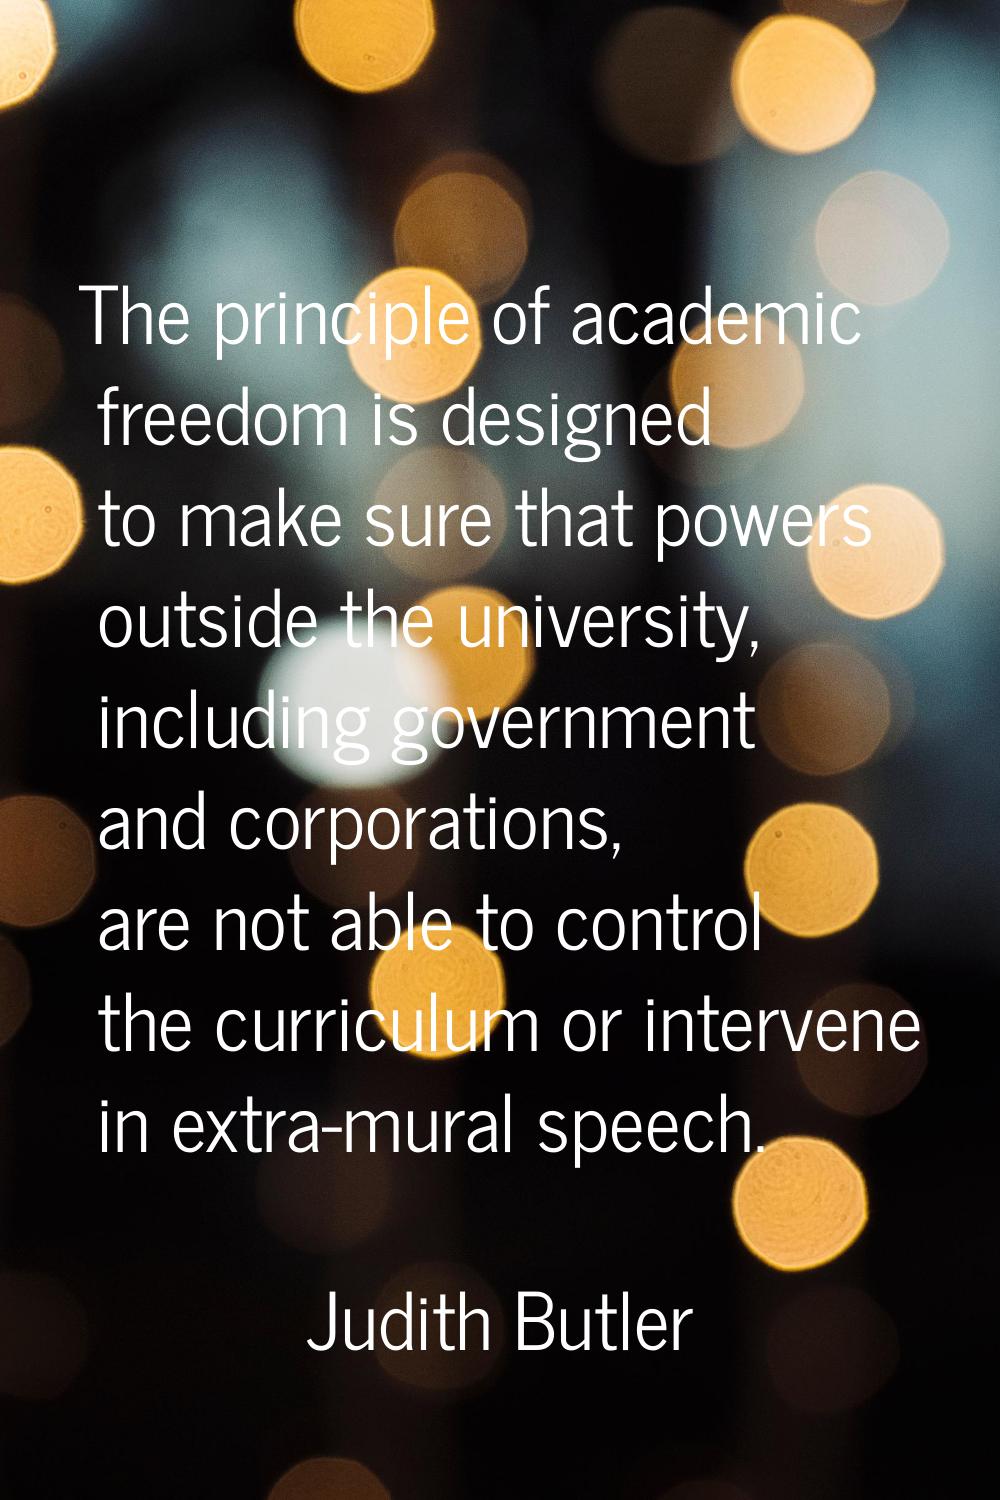 The principle of academic freedom is designed to make sure that powers outside the university, incl